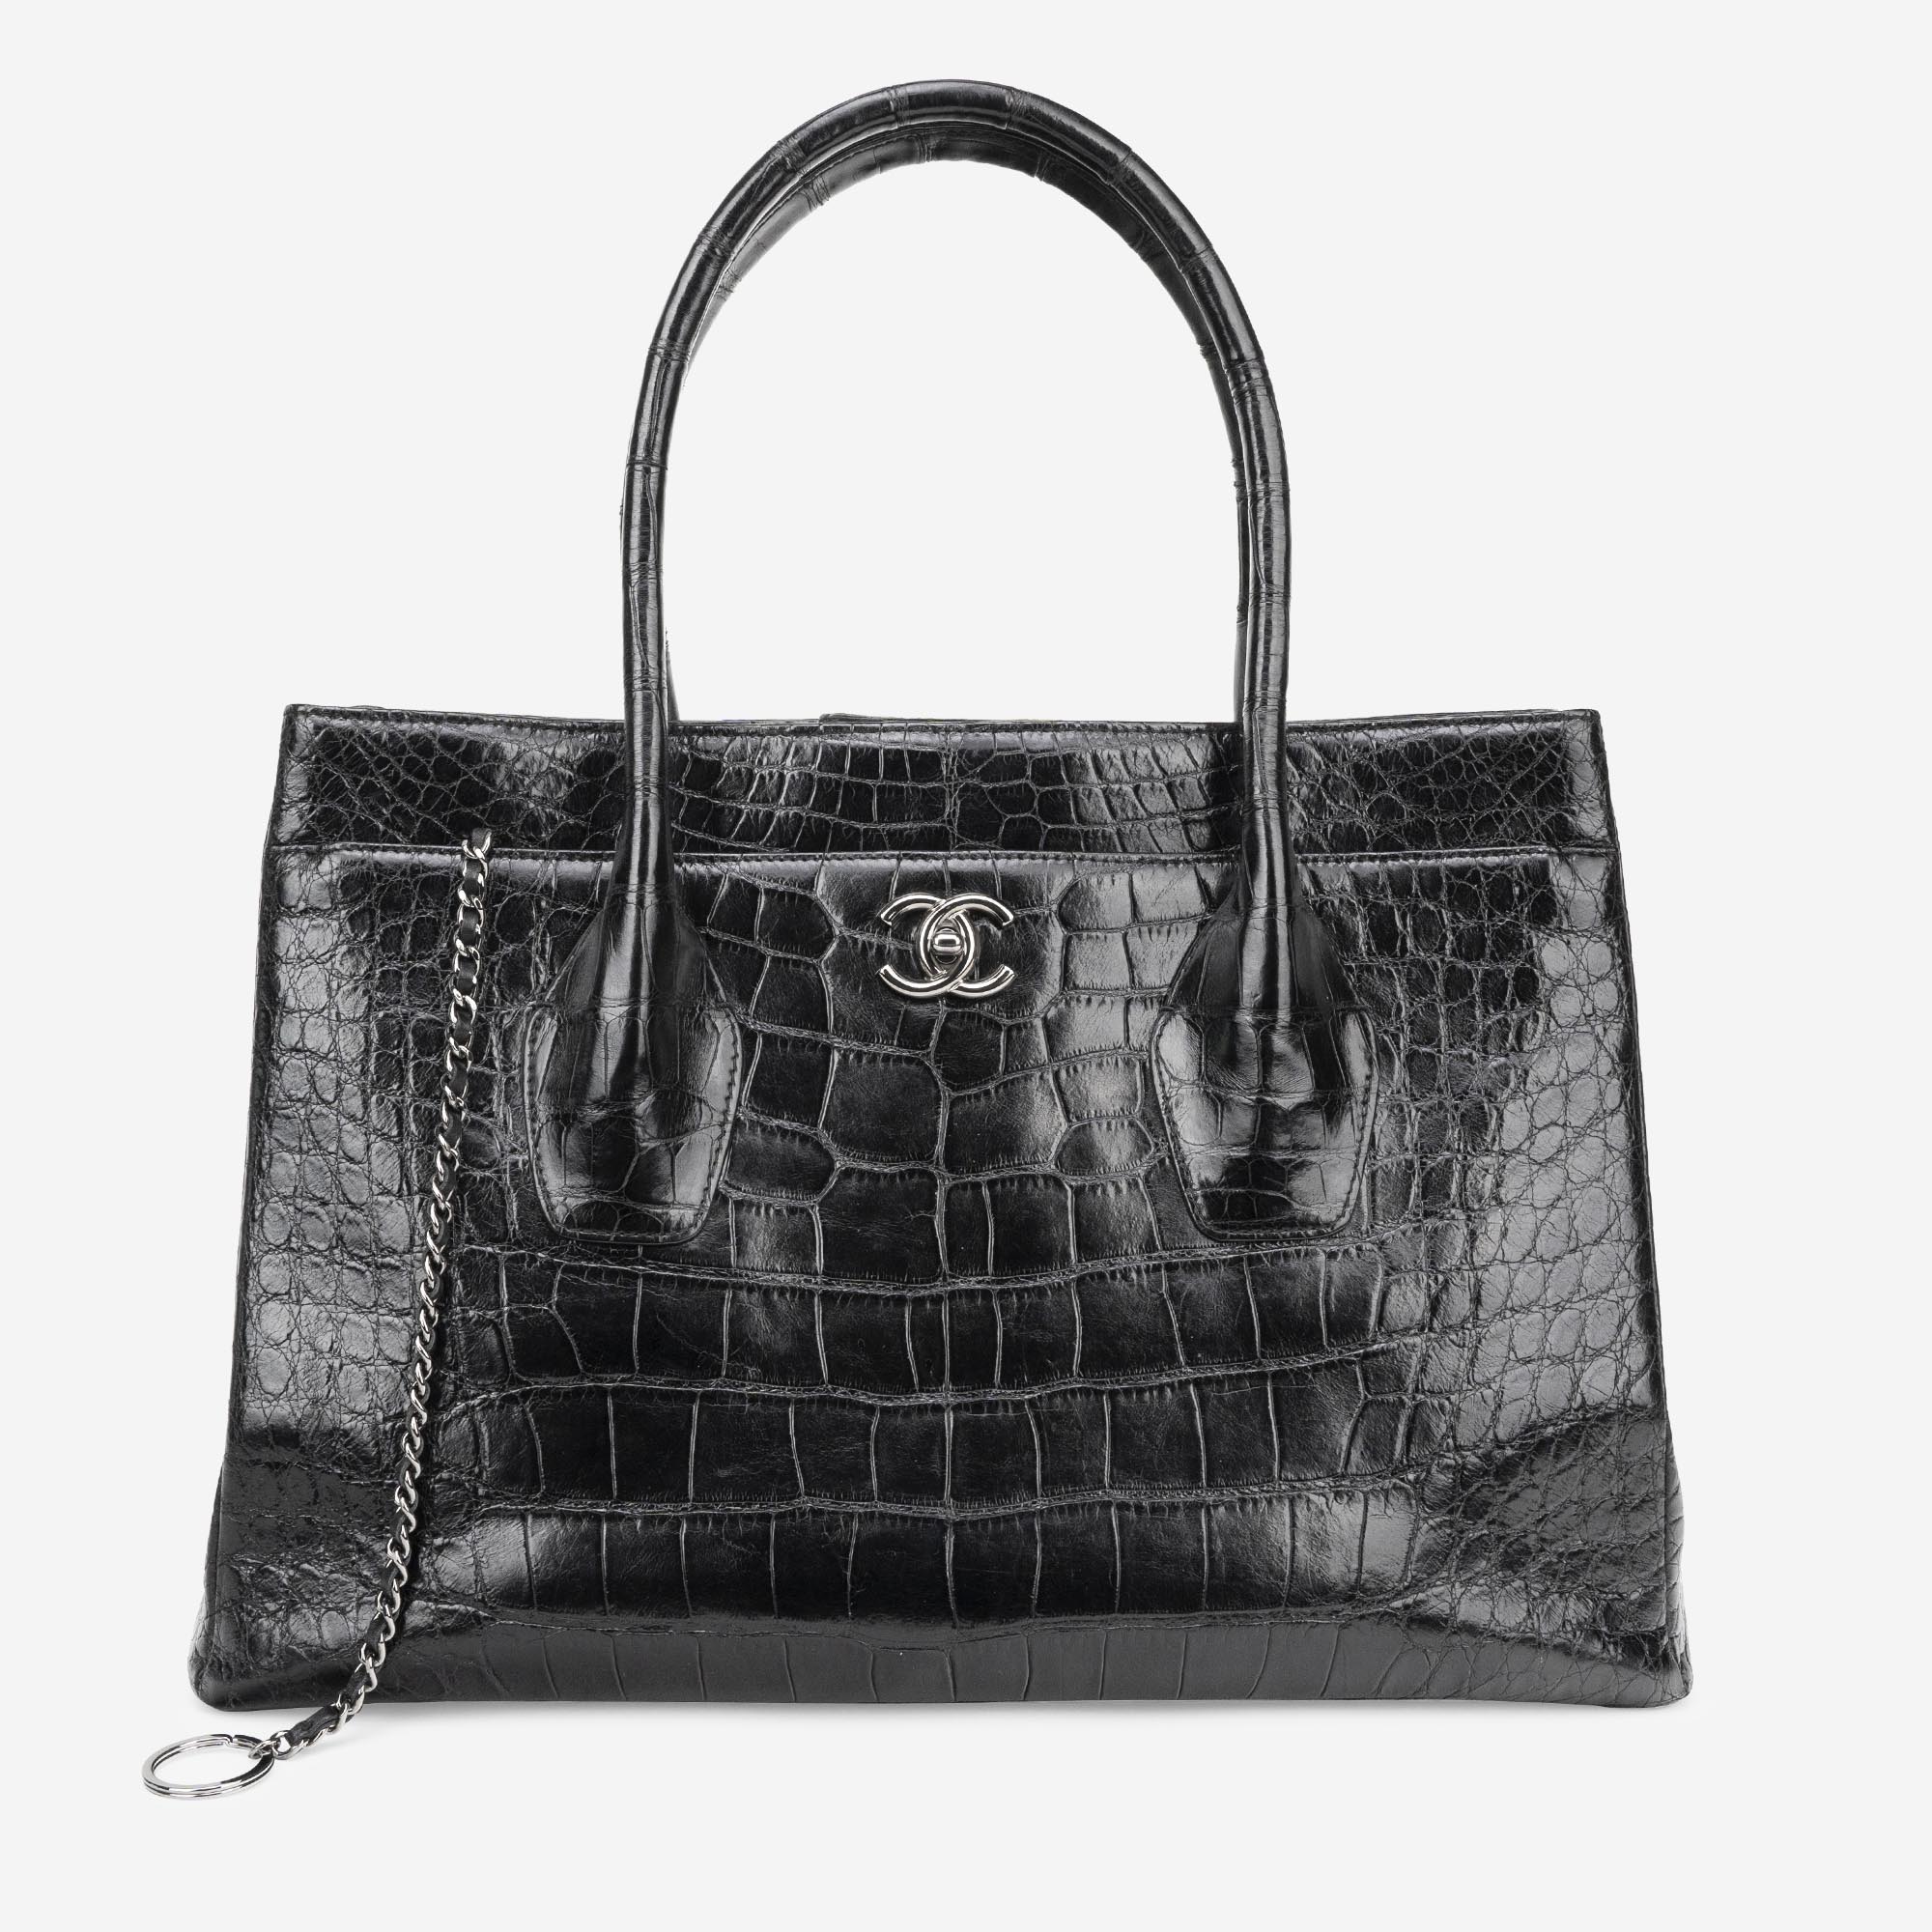 Chanel Black Crocodile Mini Flap Bag With Chain sold at auction on 13th  December  Bidsquare